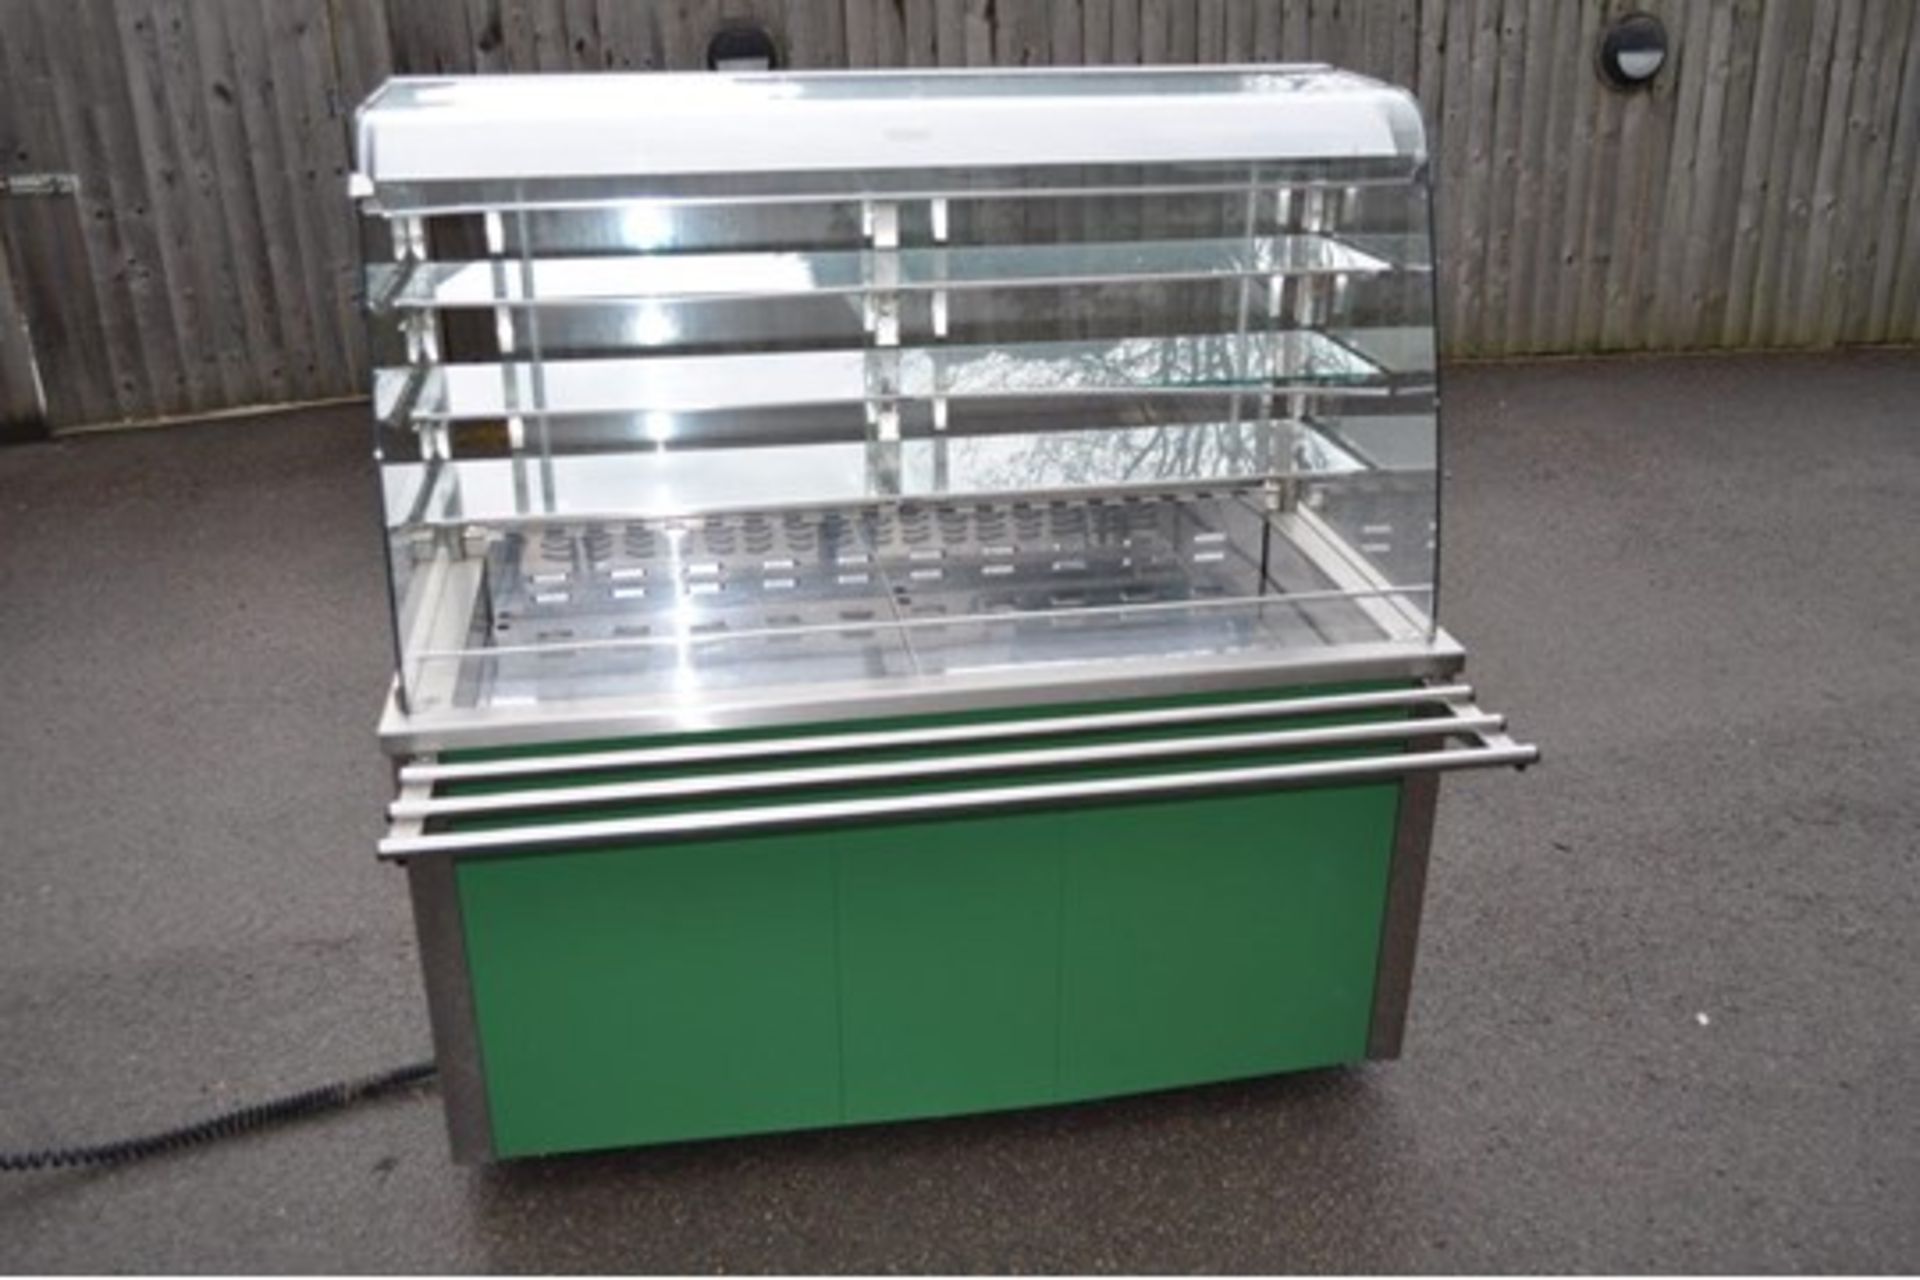 Moffat Refrigerated Counter Section With Chilled Display (Re listed due to non payer)